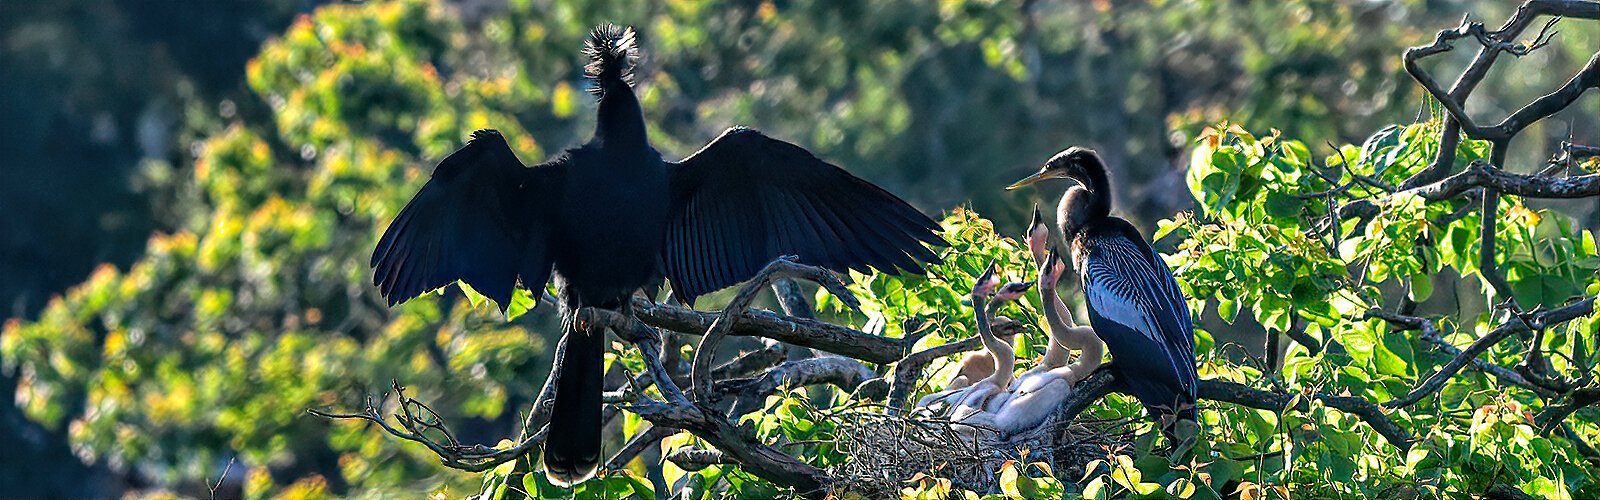 Looking royal with his breeding plumage catching the light, an anhinga dad prepares to take flight now that the mom has returned. Mom is being assailed by four impatient chicks, who can’t wait to shove their heads into her throat to get food.